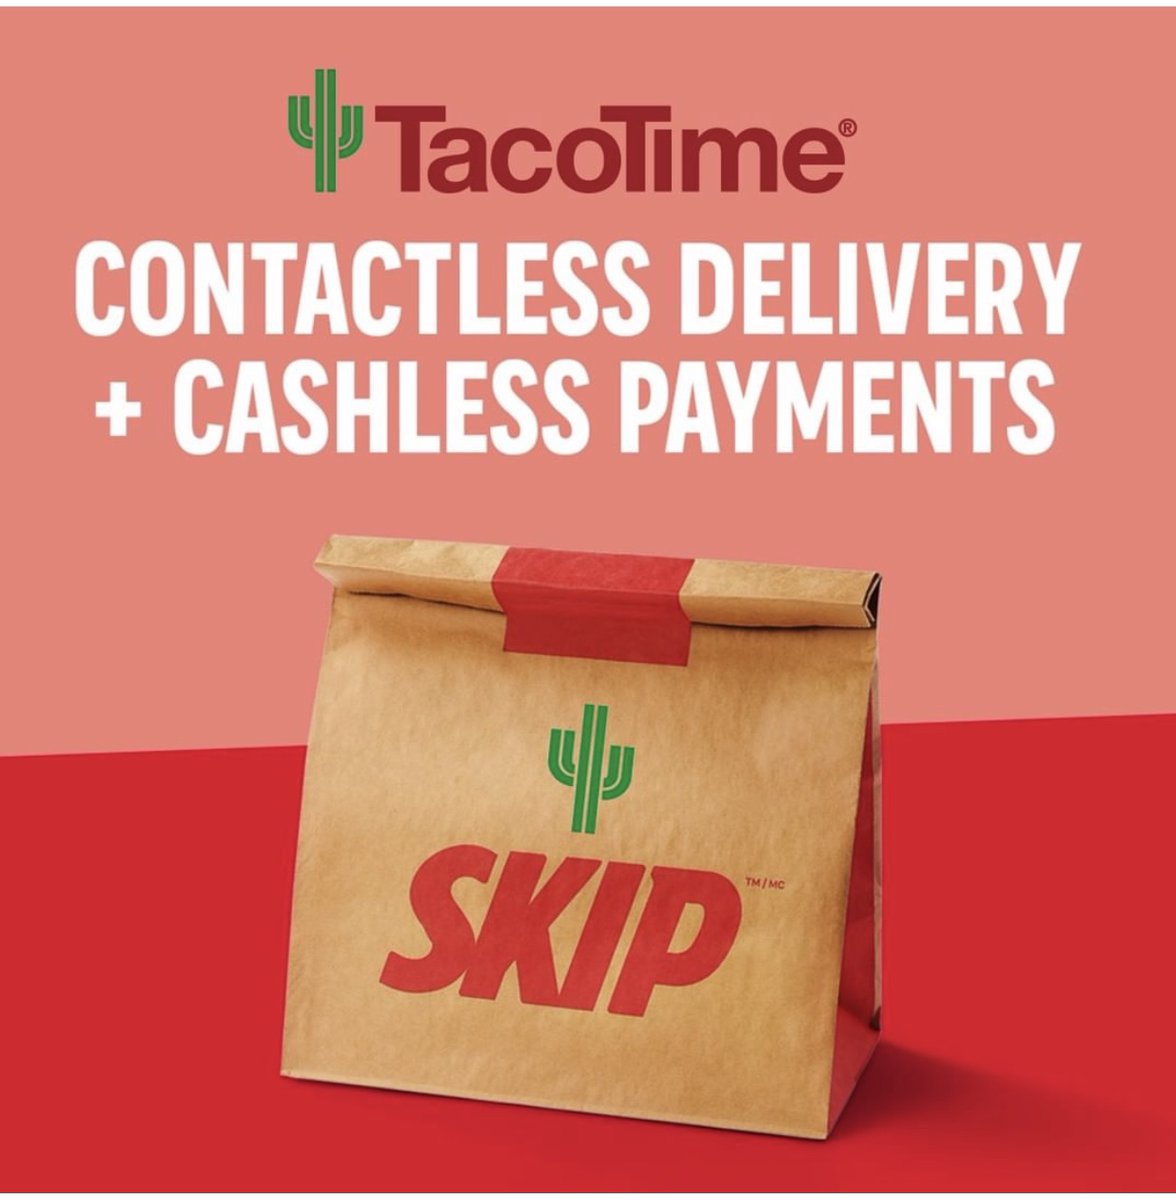 We continue to be committed to acting responsibly with your health and safety in mind. Contact less Delivery through our Skip delivery partner lets you enjoy food from Taco Time with confidence. Learn more: skipthedishes.com/coronavirus-up…